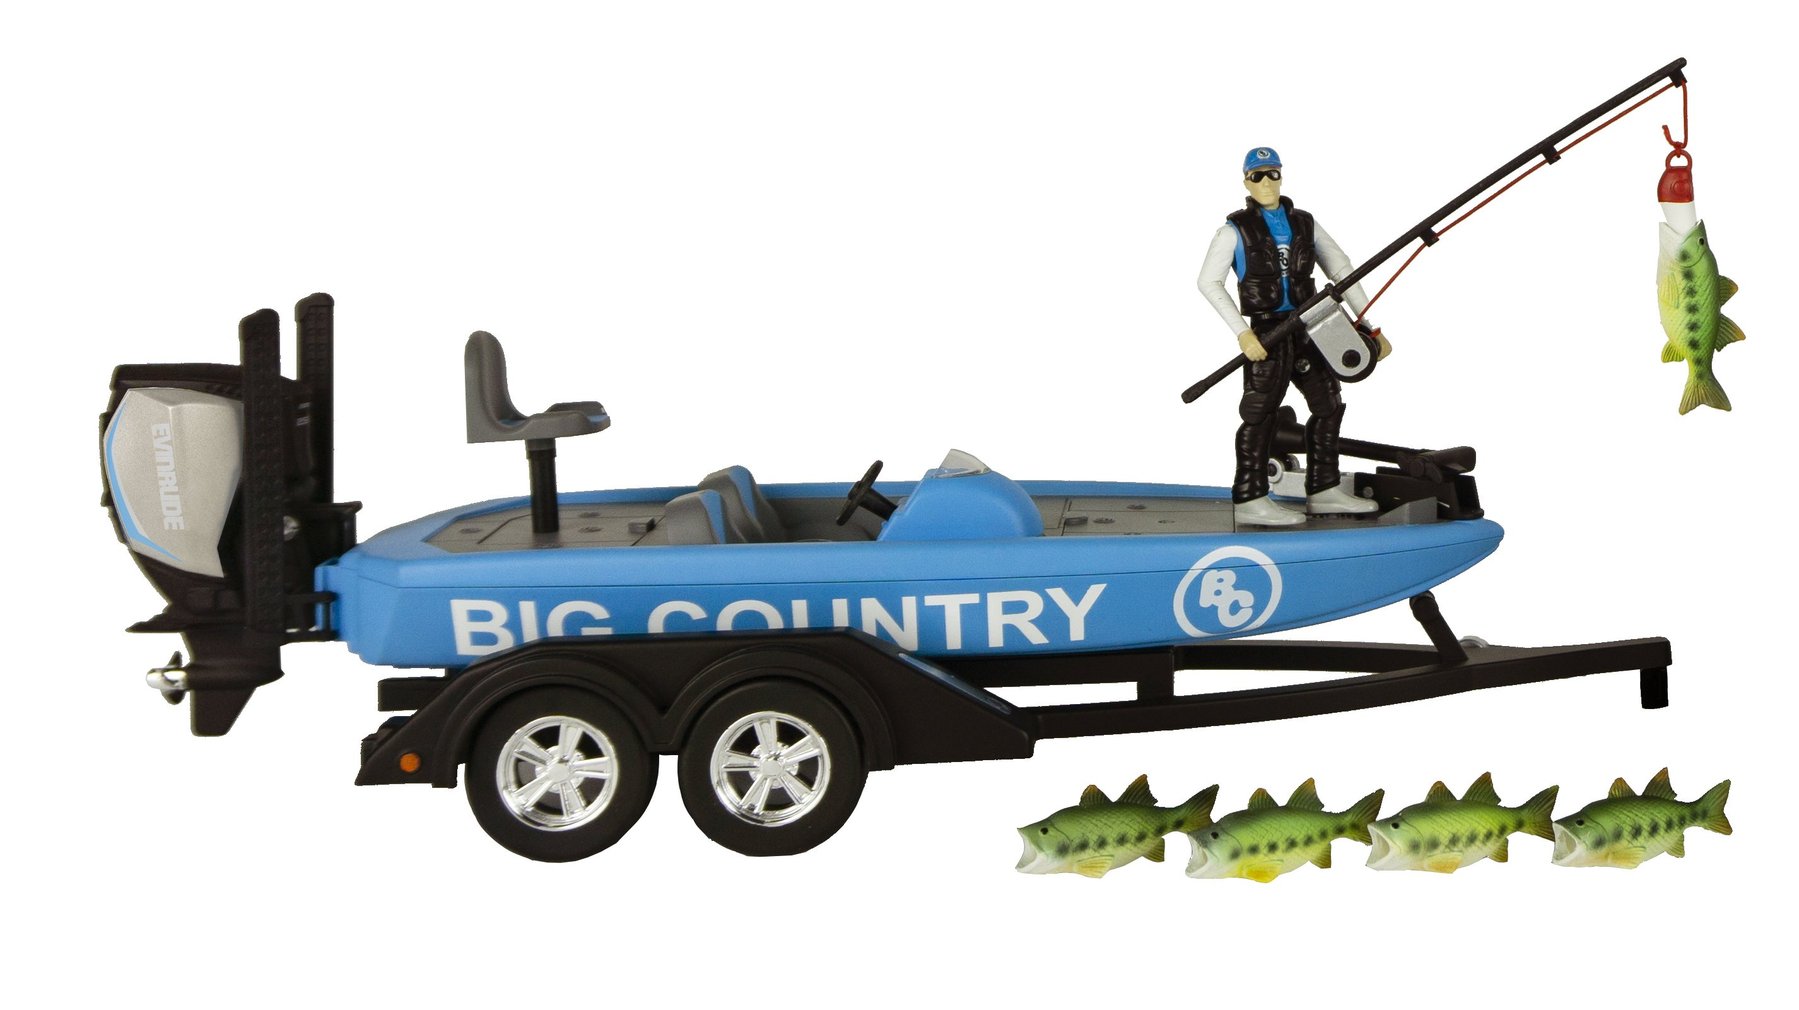 Big Country Toy - Bass Boat Implements 11pc - Bairnsdale Horse Centre